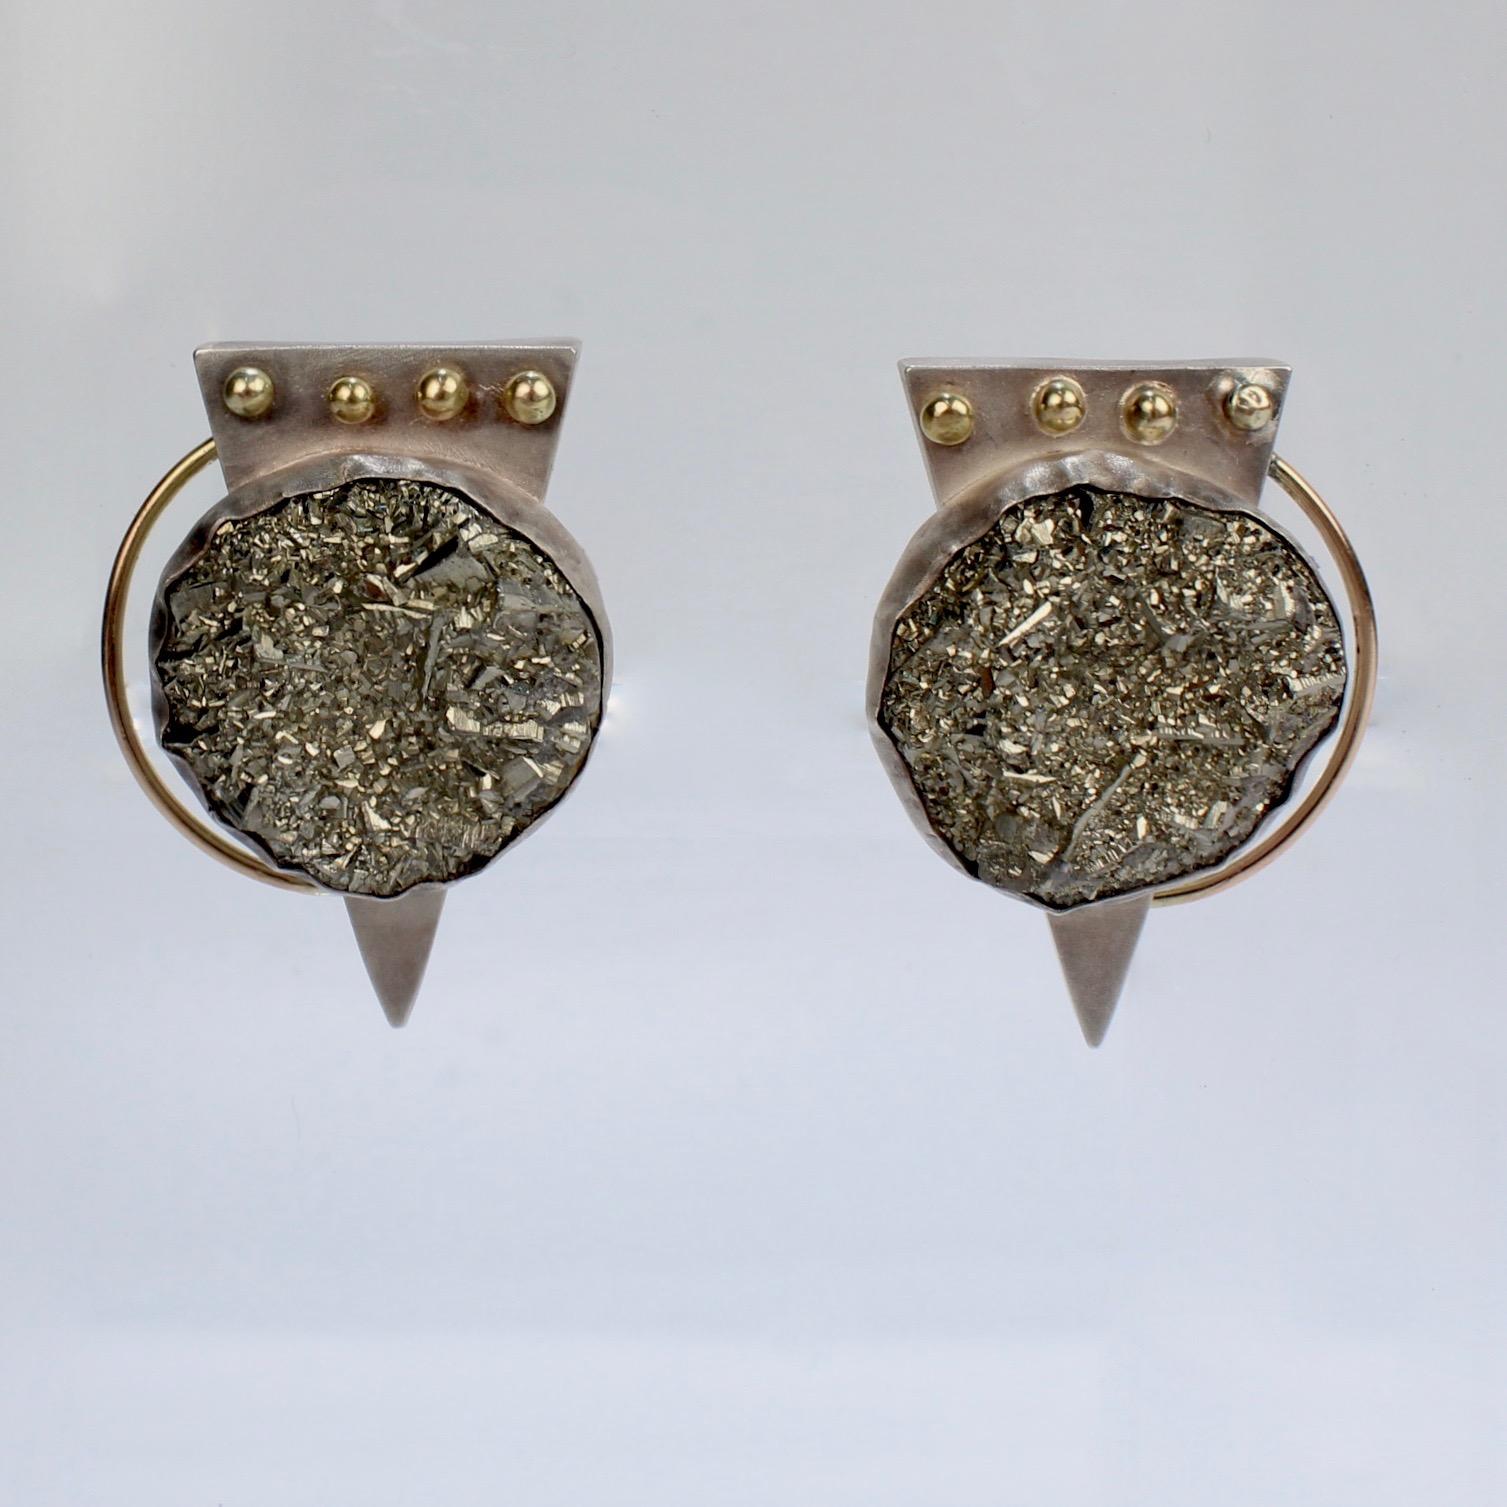 A great pair of modern, Memphis-style geometric earrings by Yumi Ueno.

Comprised of sterling silver and 14k gold and bezel set with large, circular pyrite cabochons atop triangular backs. Four gold spheres are set at the top of each triangle,